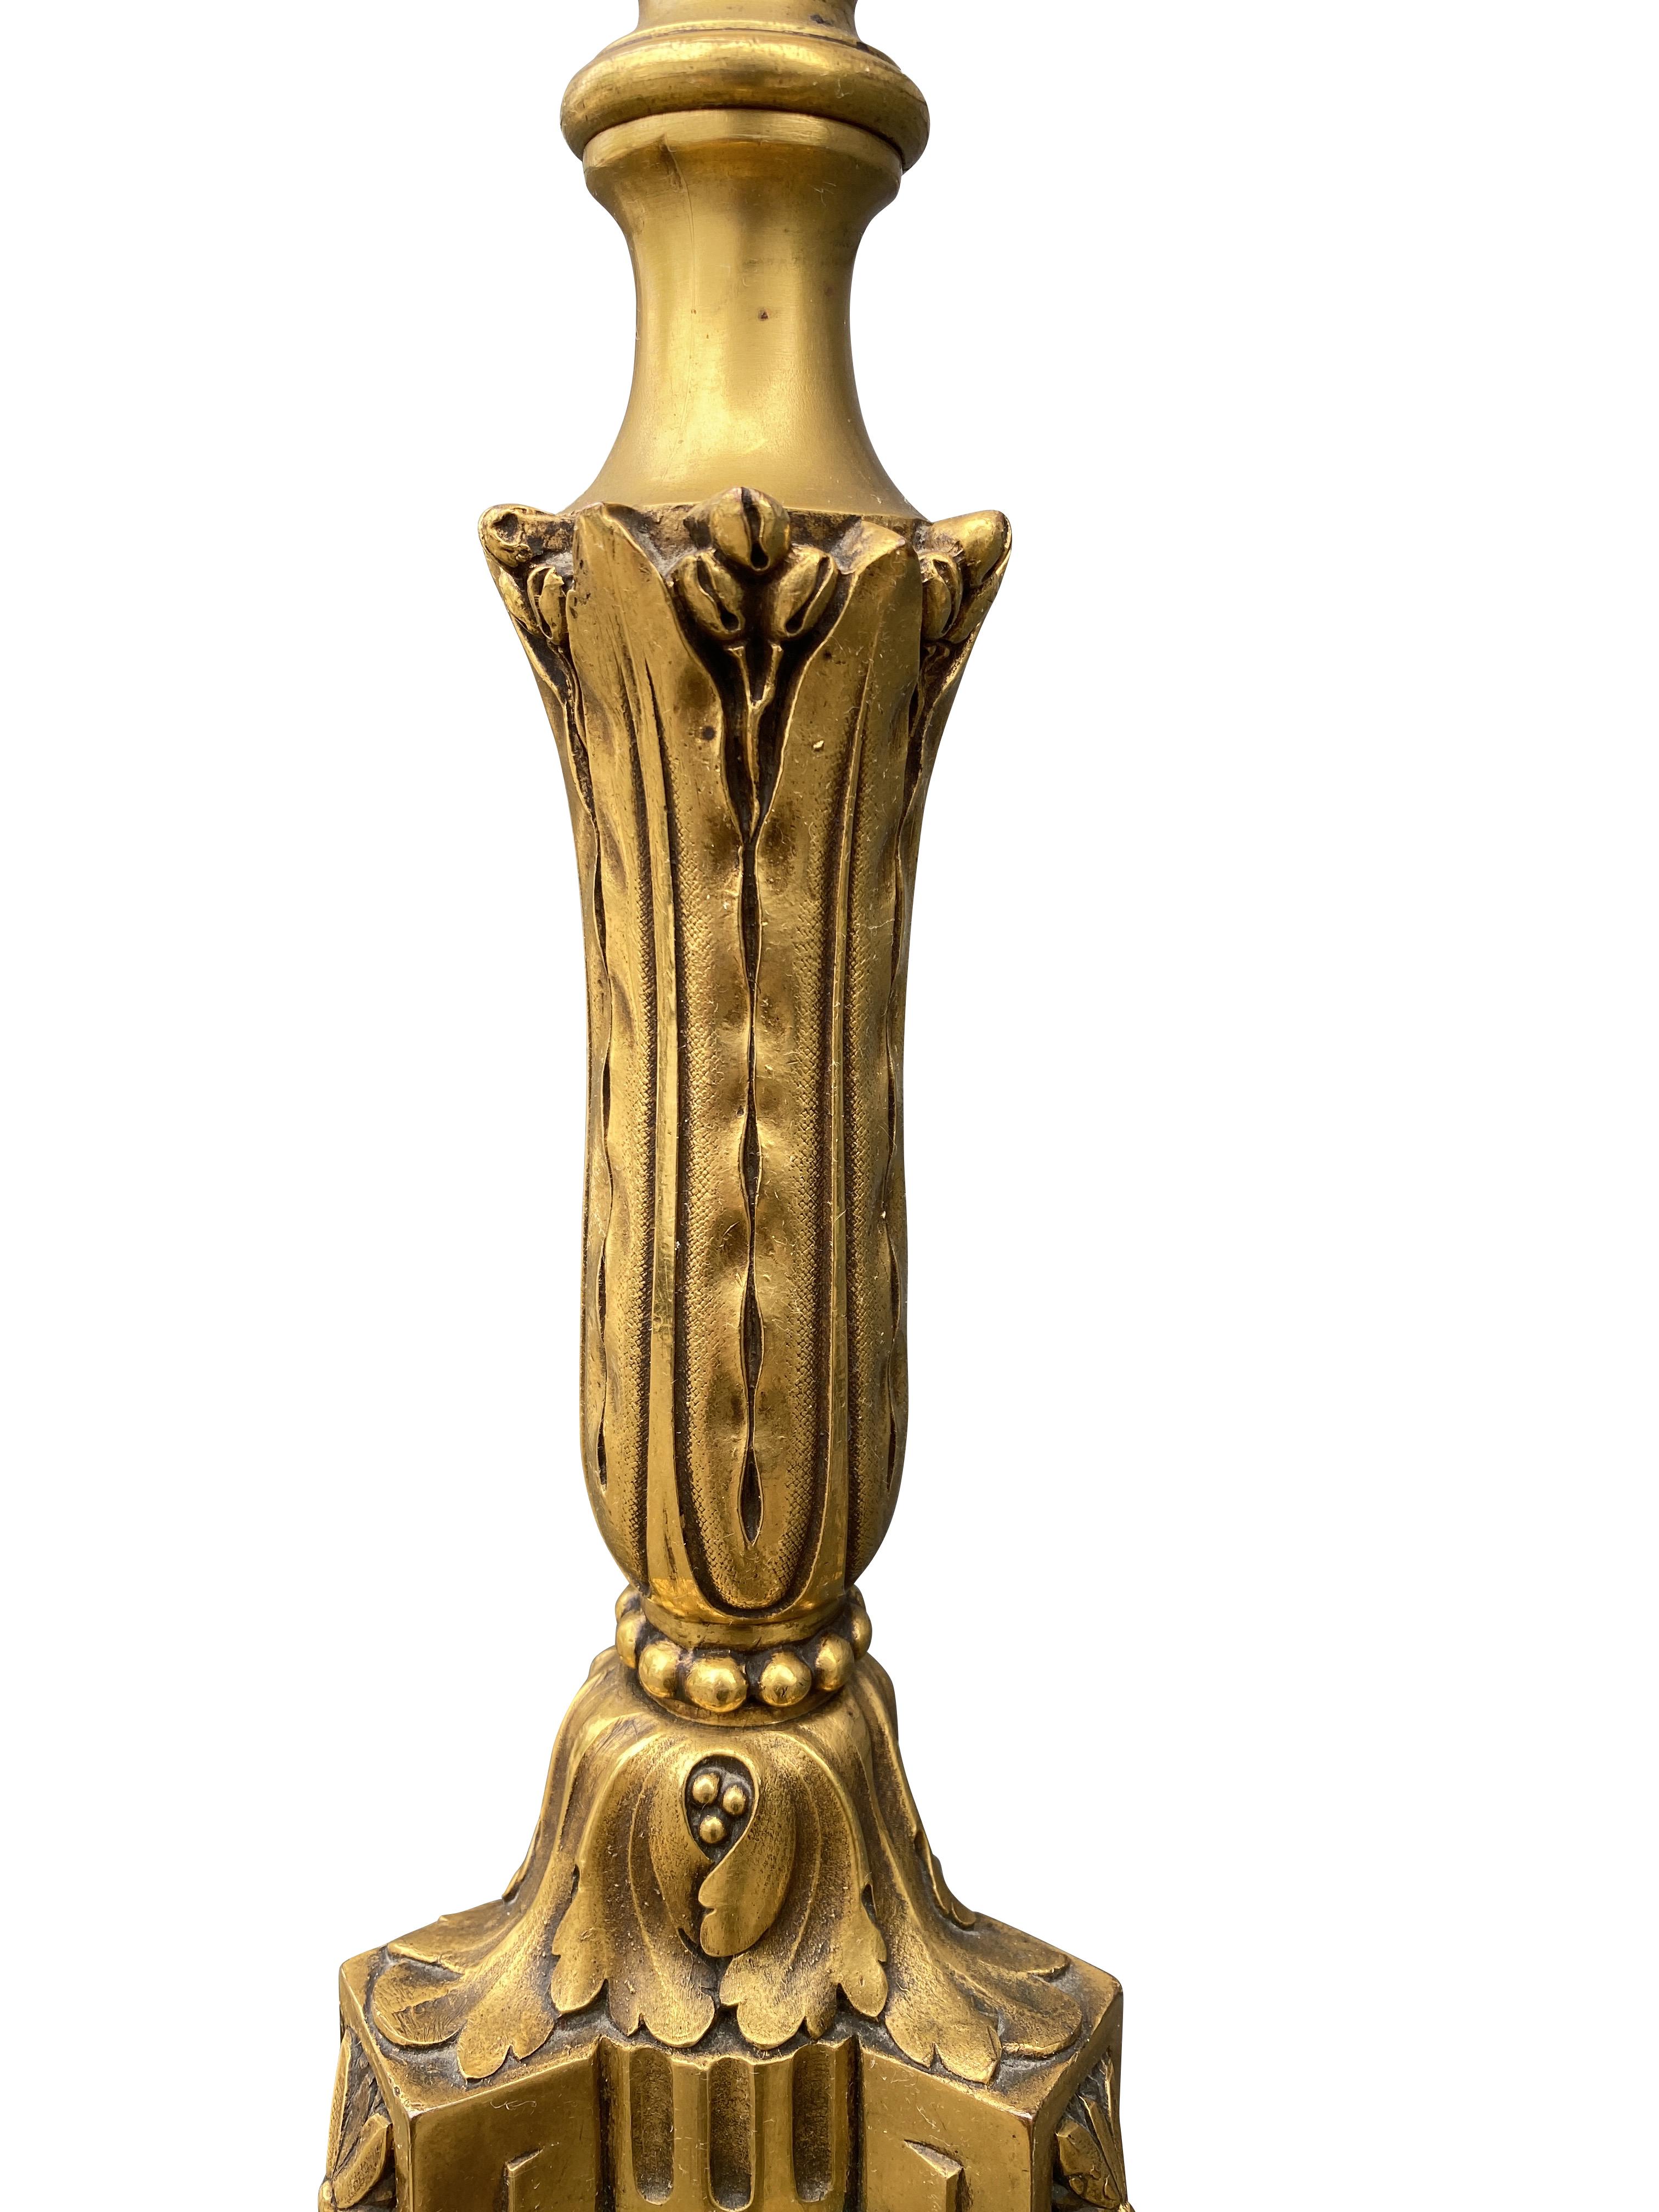 E.F Caldwell and Company Stehlampe aus vergoldeter Bronze (Neoklassisches Revival) im Angebot